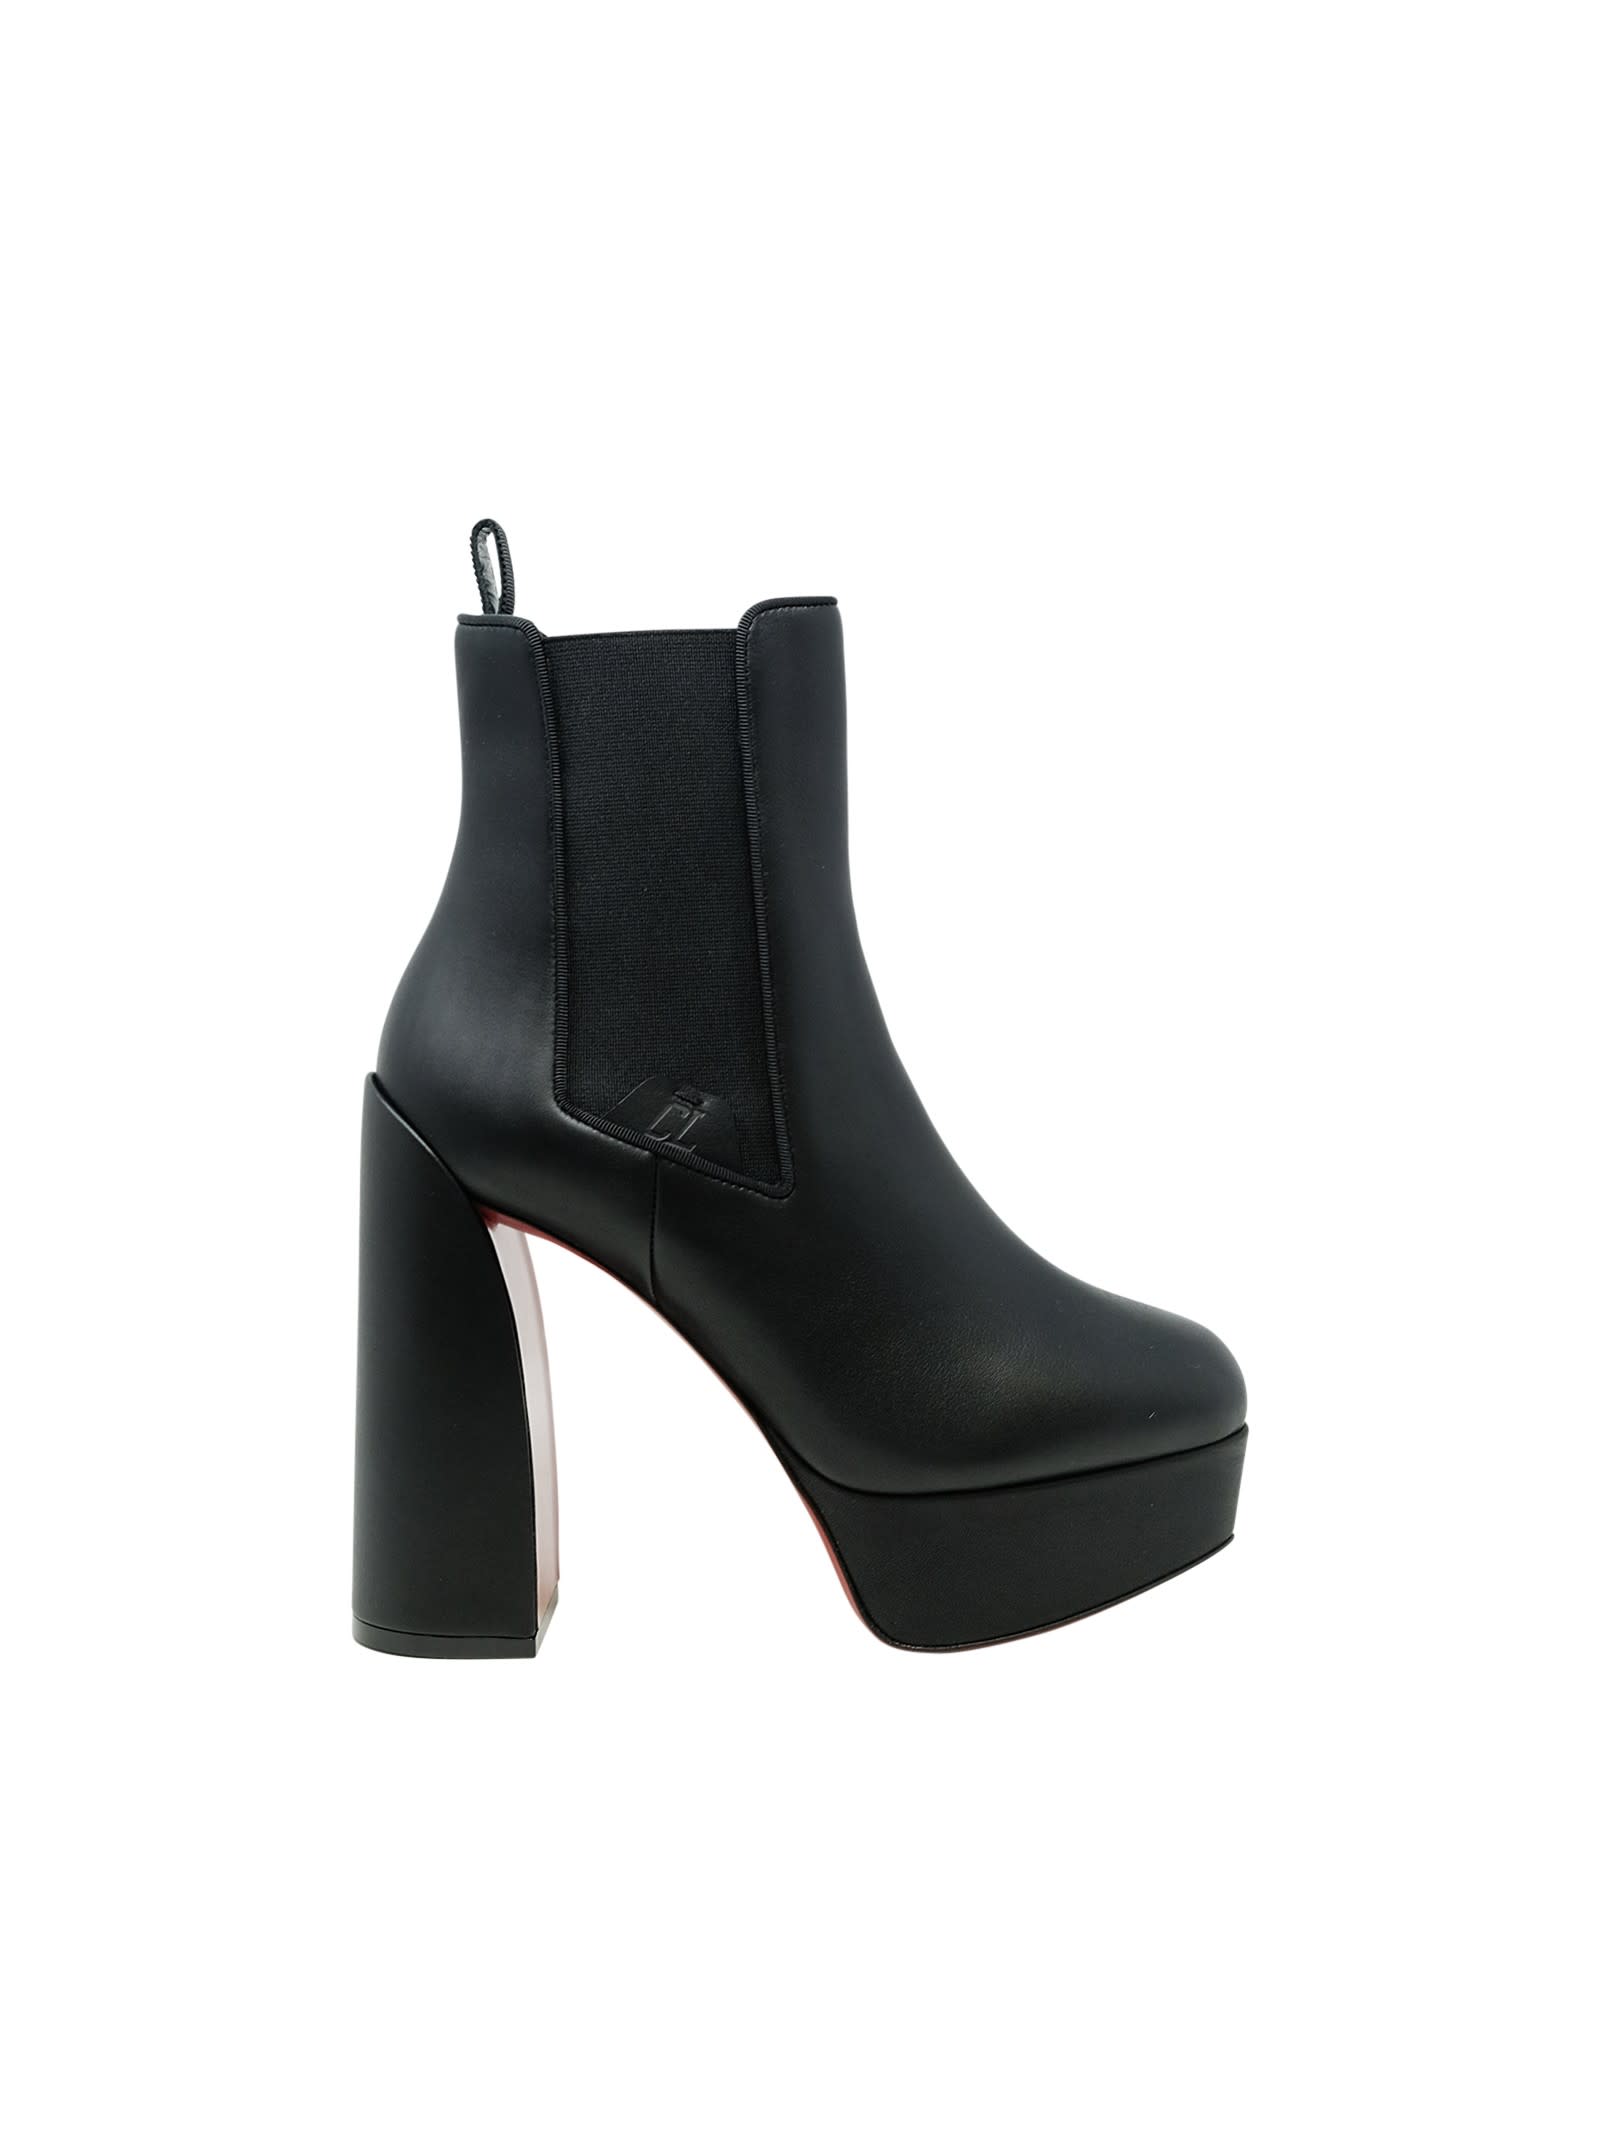 Christian Louboutin Black Leather Movidastic 130 Calf Ankle Boots